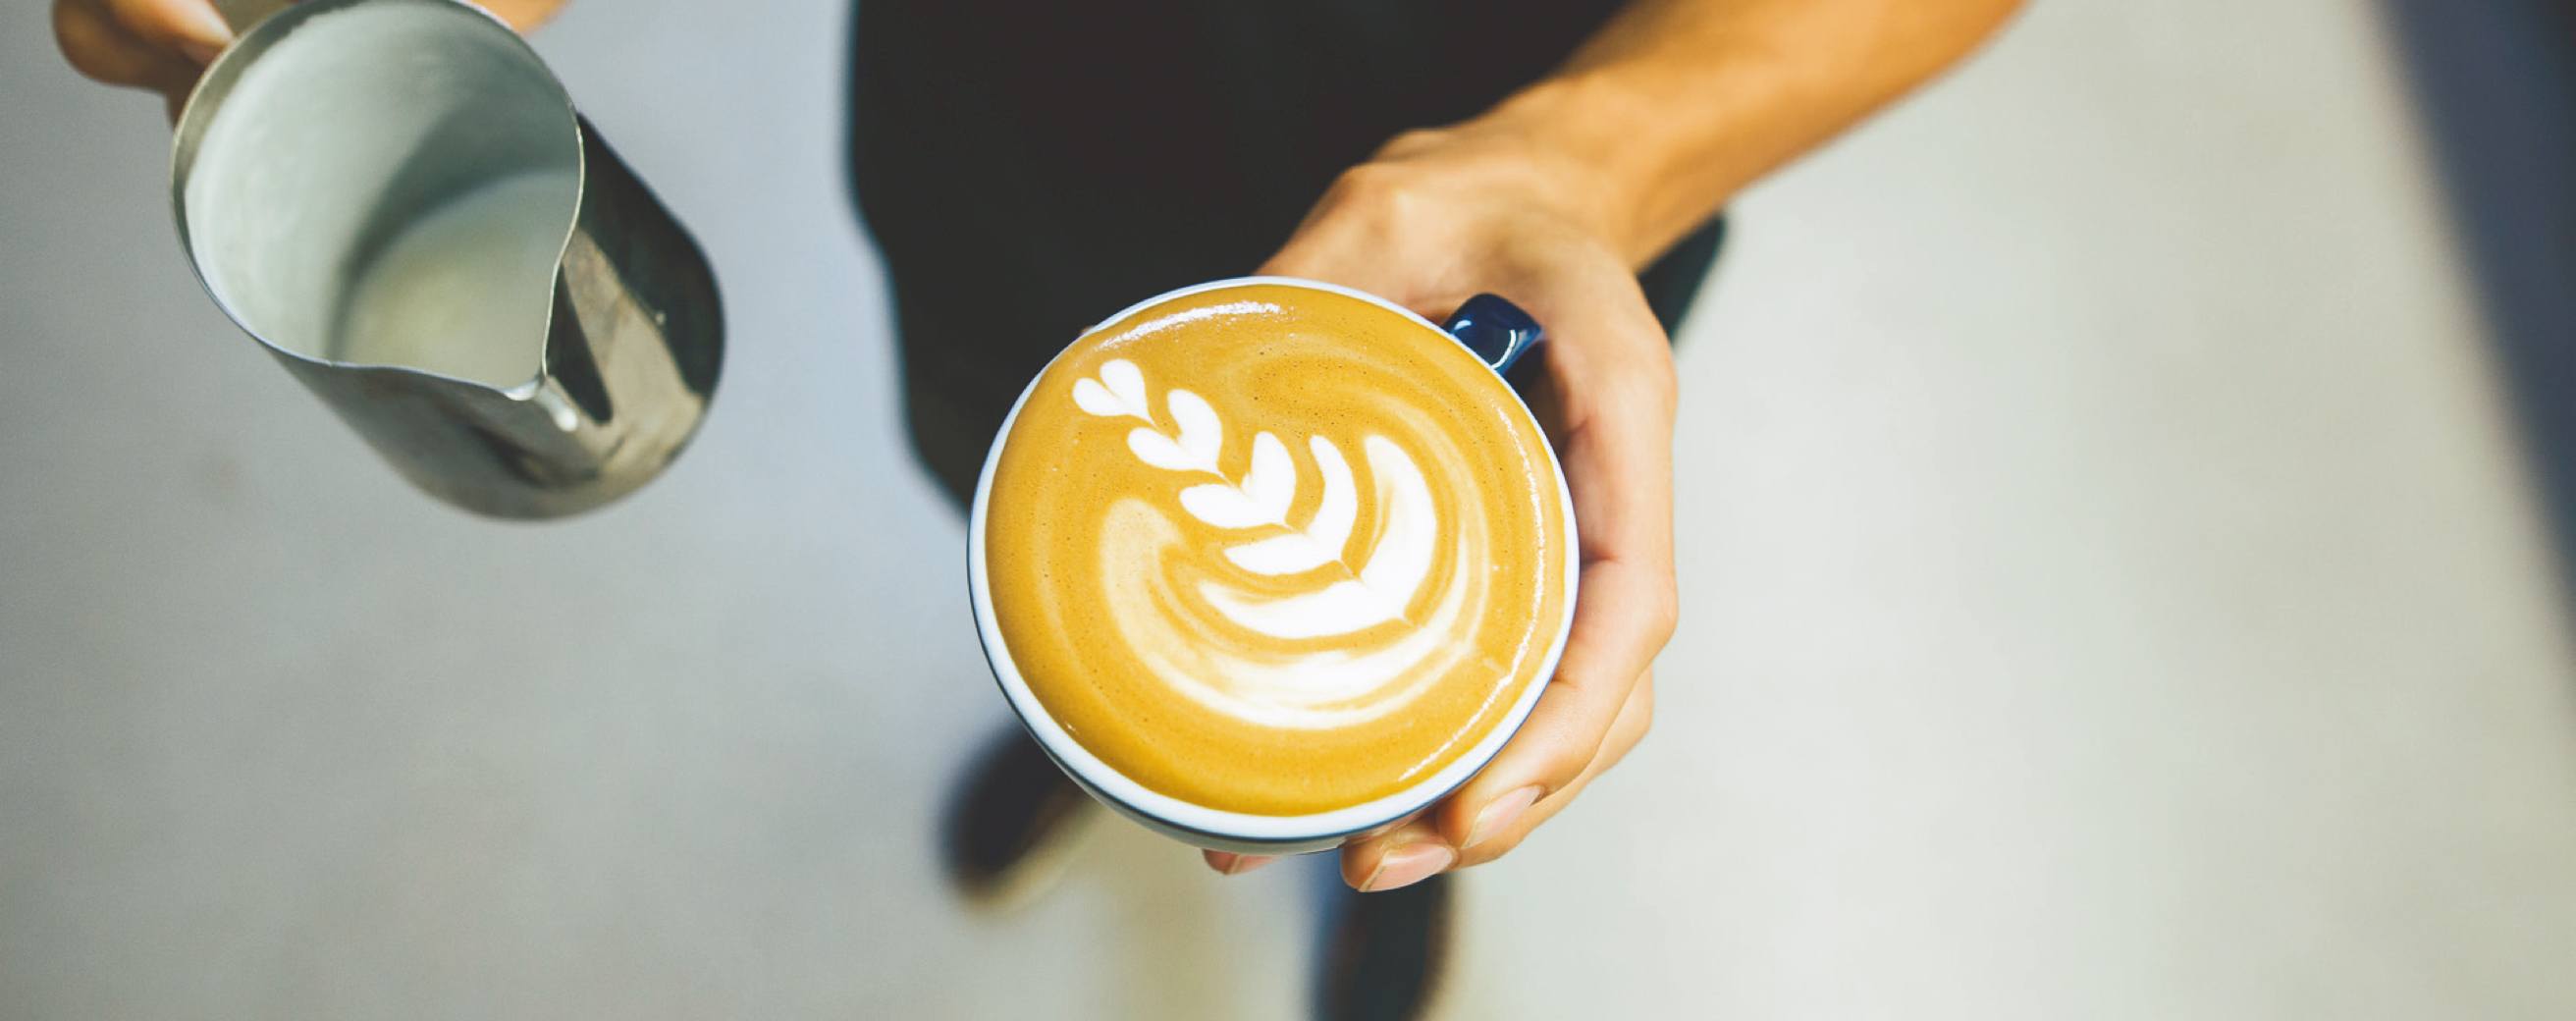 Learn how to make the perfect latte art tulip with the smart milk